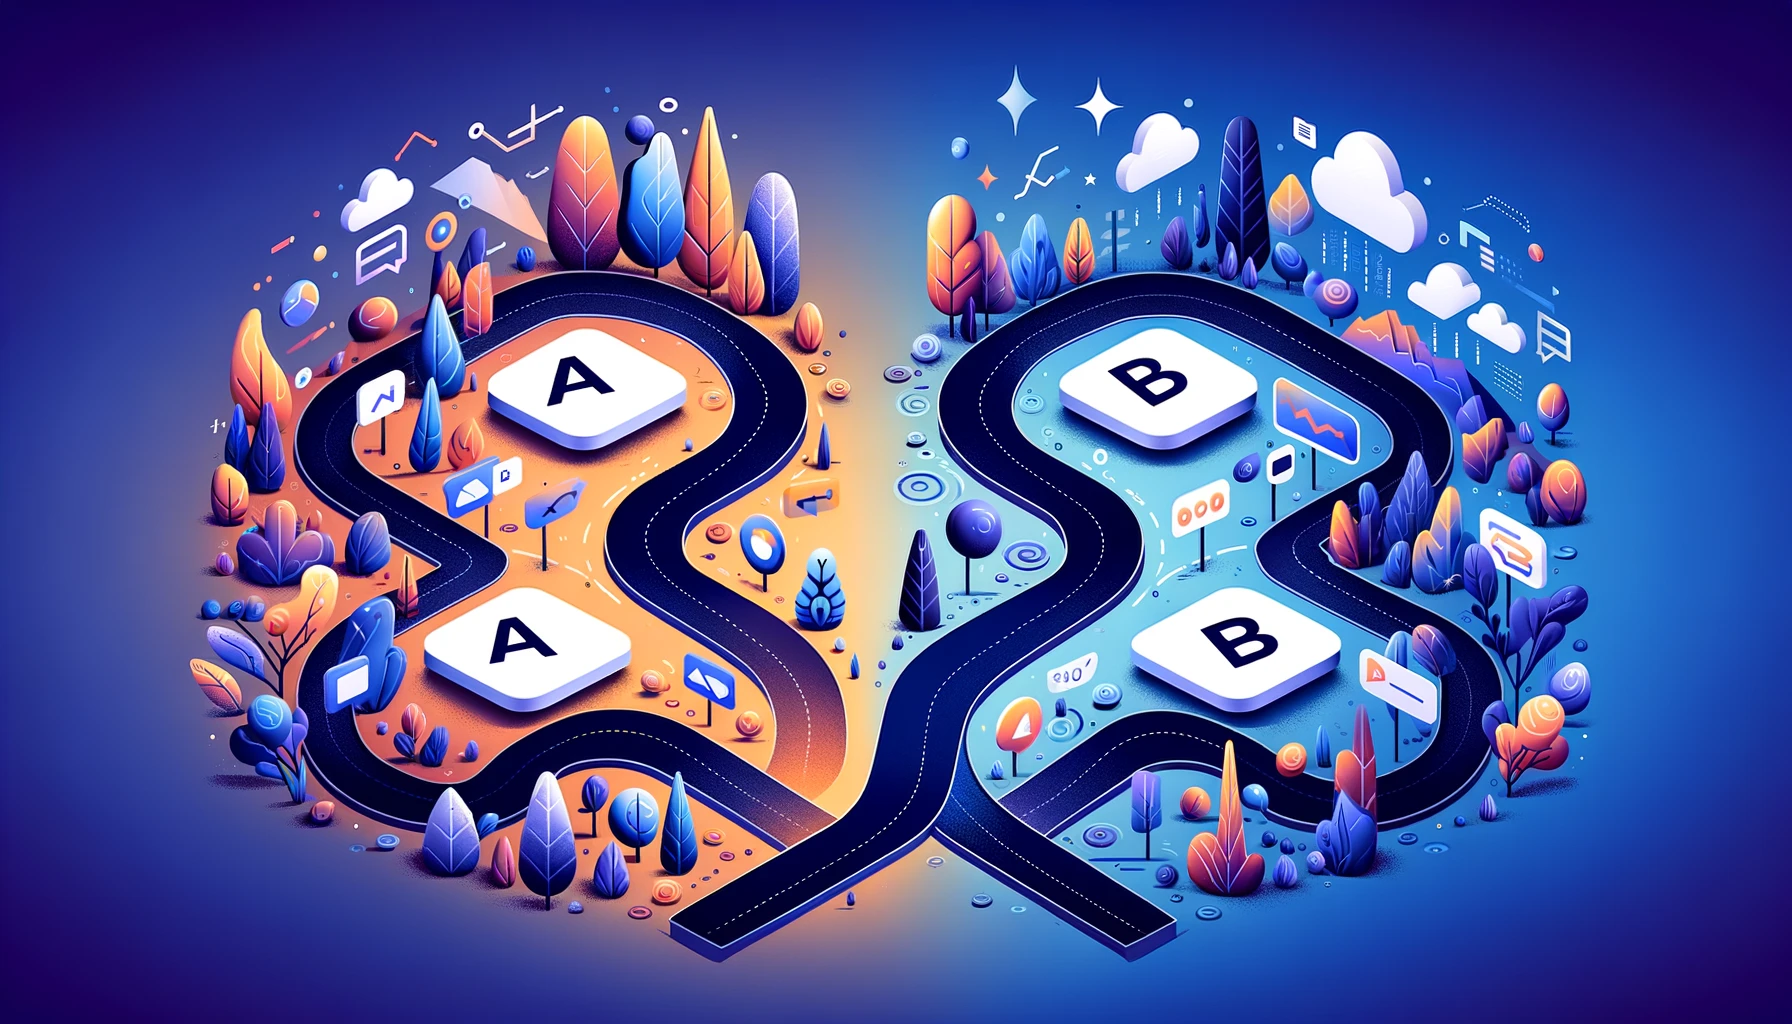 Abstract visual representation of Facebook Ad A/B Testing, depicting two distinct pathways symbolizing different ad scenarios, encompassing elements of data analysis and user engagement.